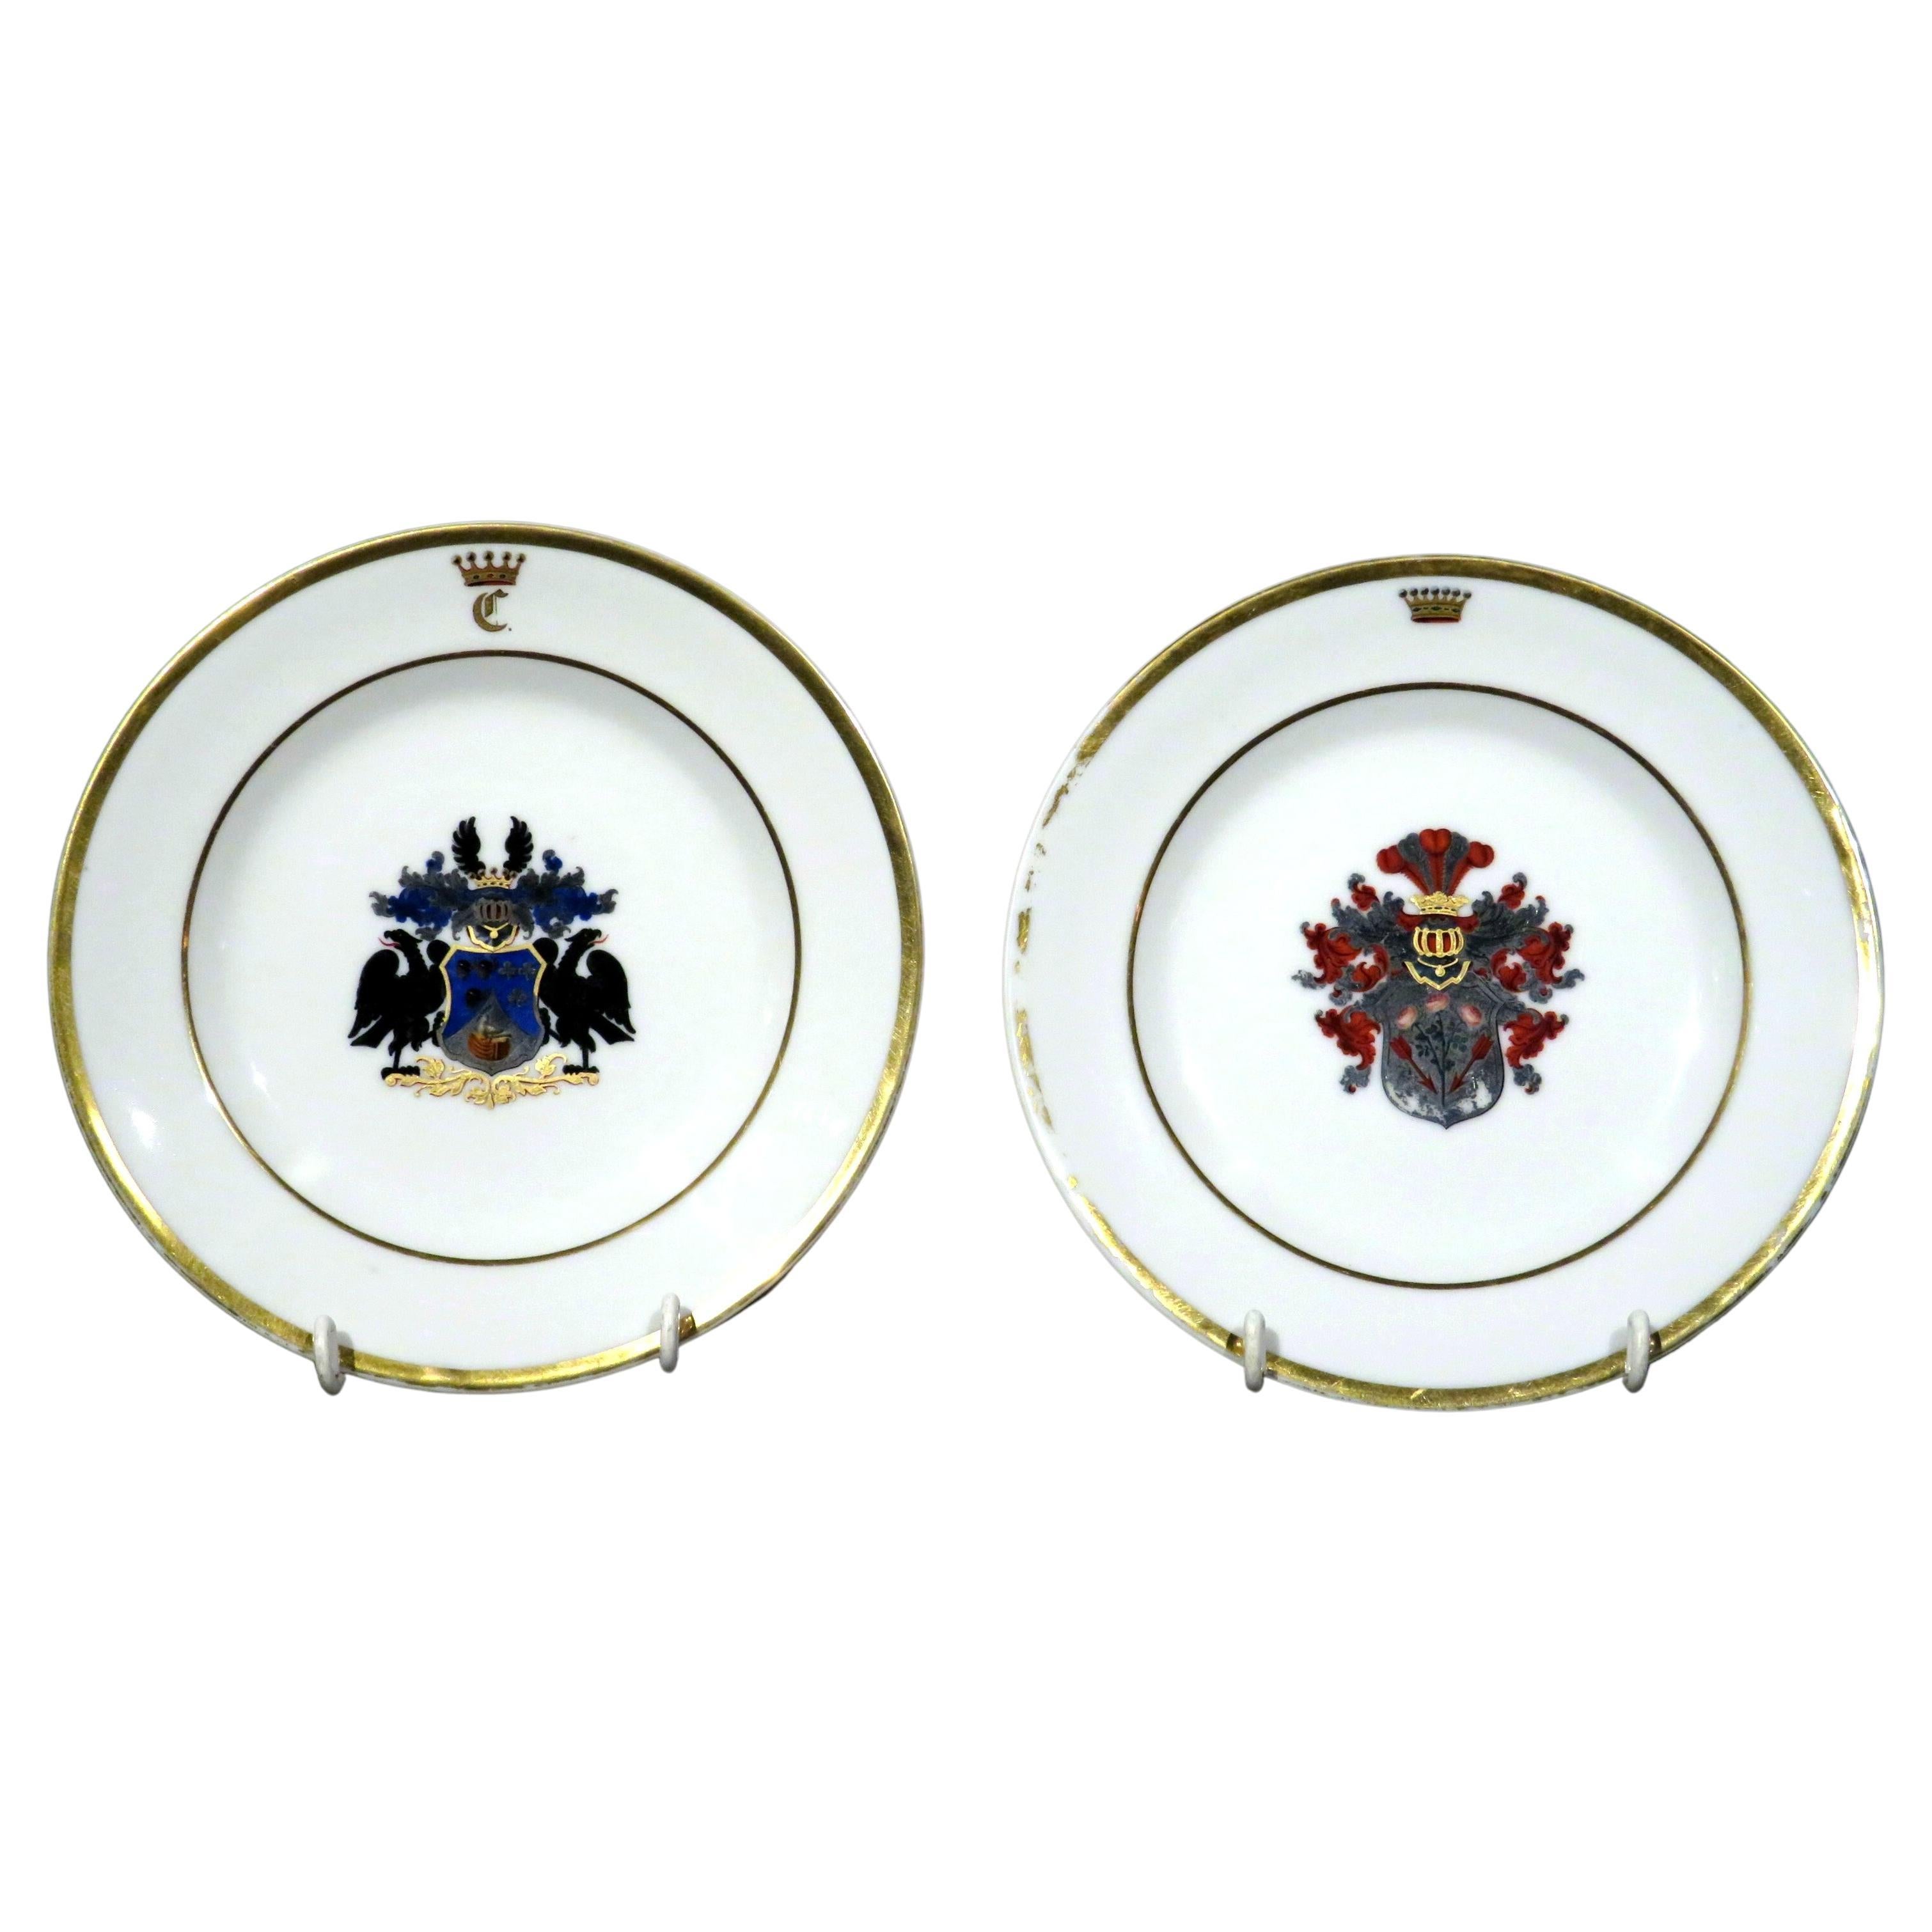 Very Good Pair of 19th Century German Porcelain Cabinet Plates, Dated Bonn 1853 For Sale